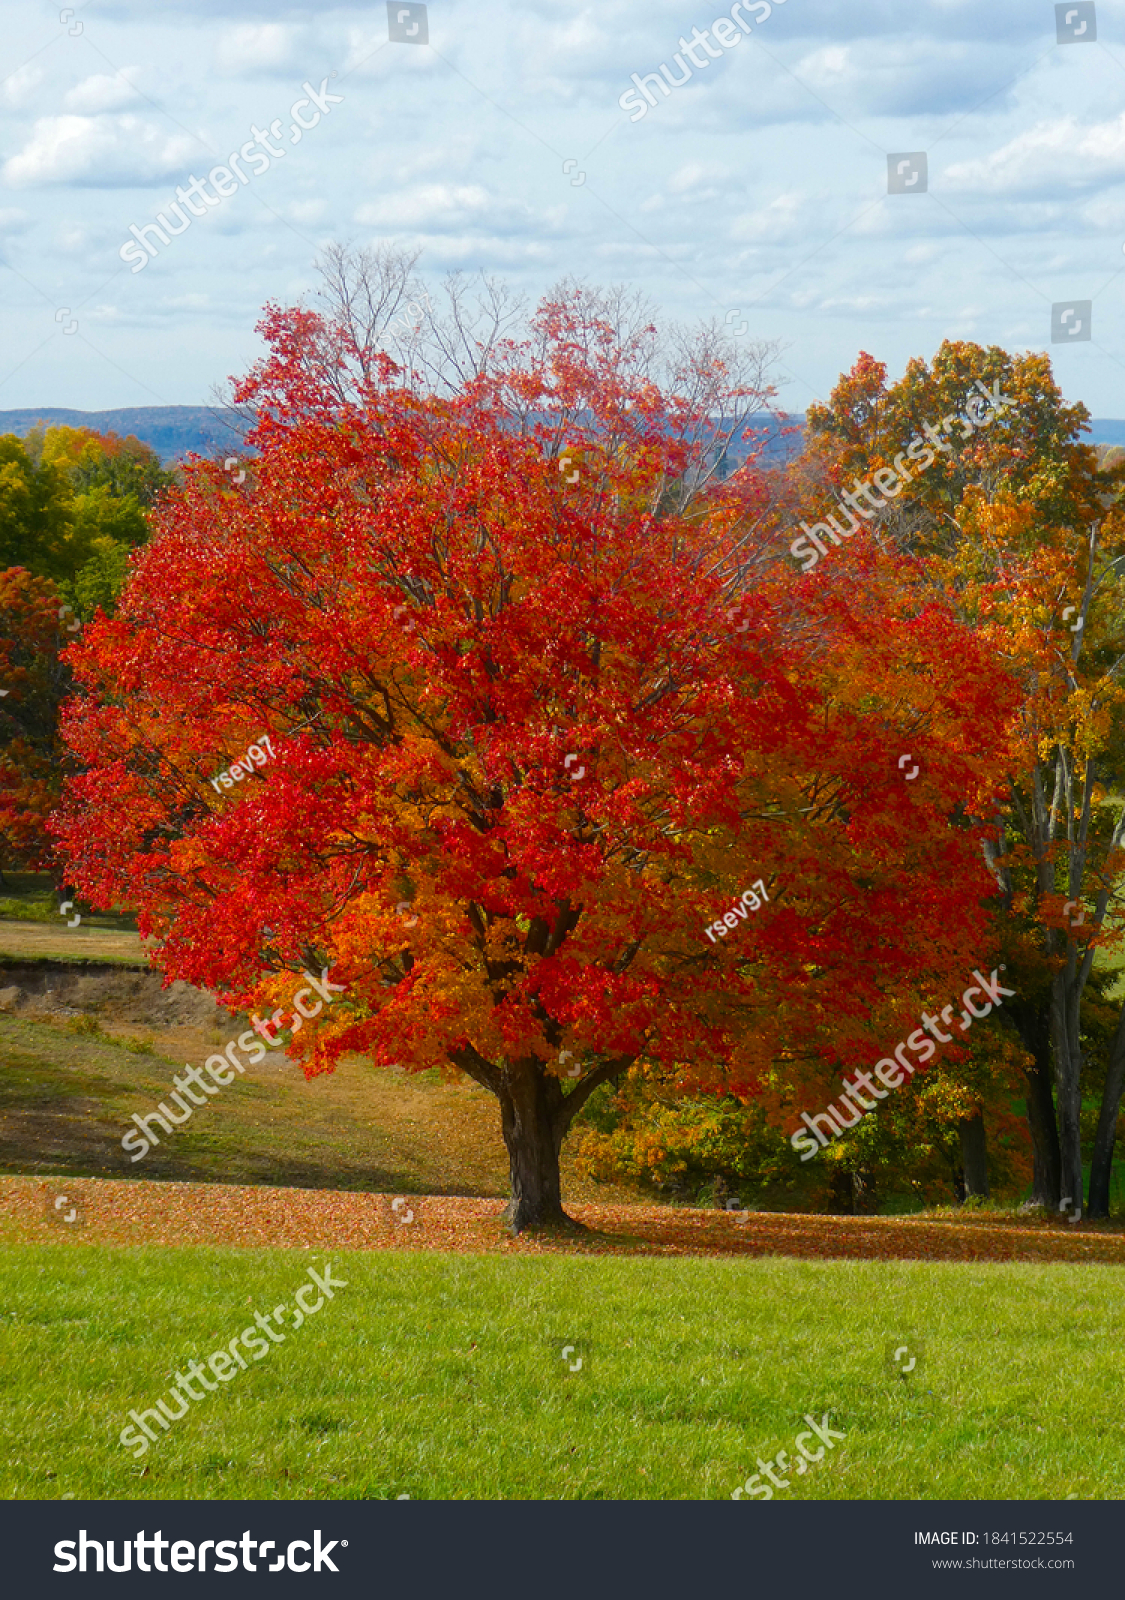 Beautiful view of a Sugar Maple tree (Acer Saccharum) with bright red and orange foliage and a scenic background at a farm in New York. #1841522554